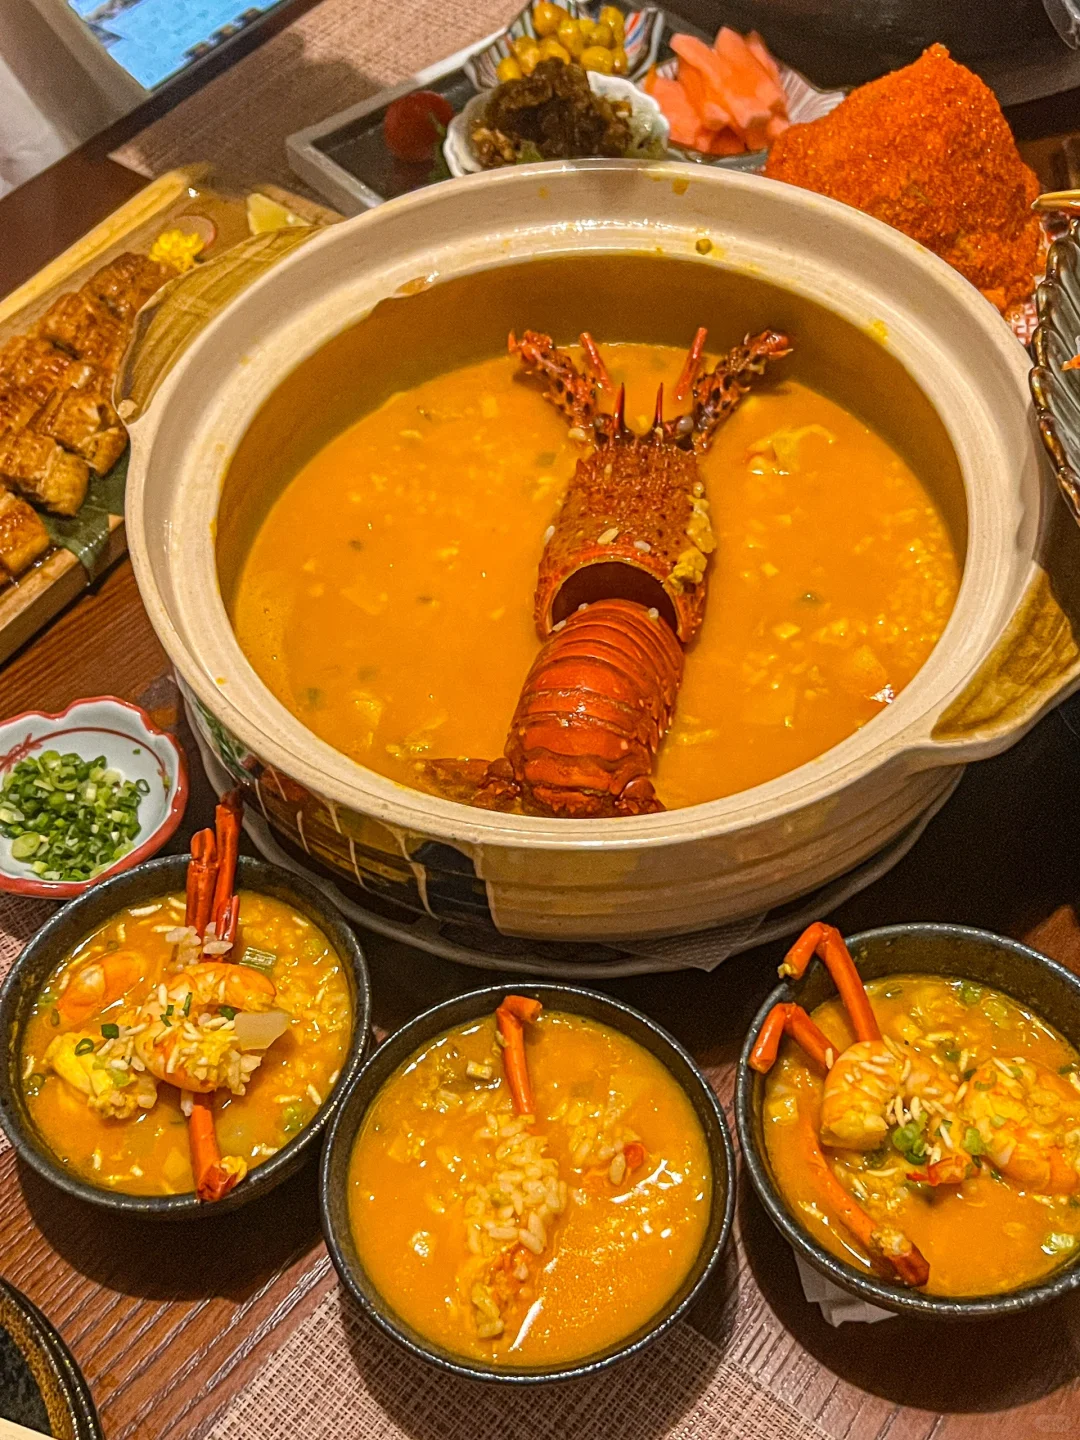 Macao-Chitori Gion Taipa Branch, the best lobster rice in Macau for NT$189